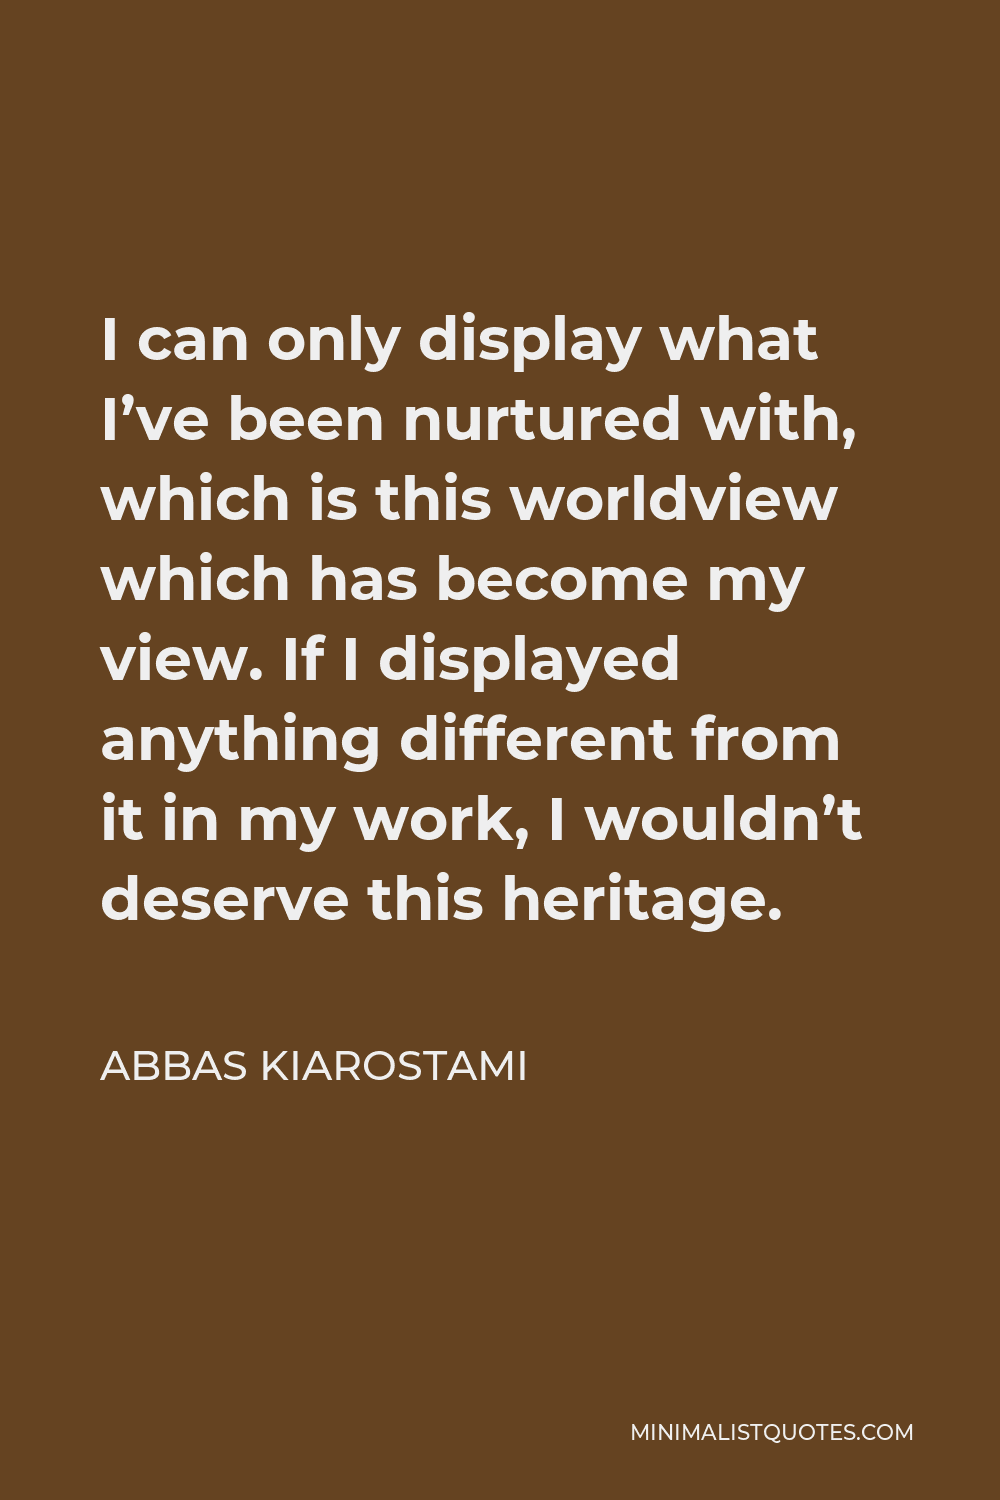 Abbas Kiarostami Quote - I can only display what I’ve been nurtured with, which is this worldview which has become my view. If I displayed anything different from it in my work, I wouldn’t deserve this heritage.